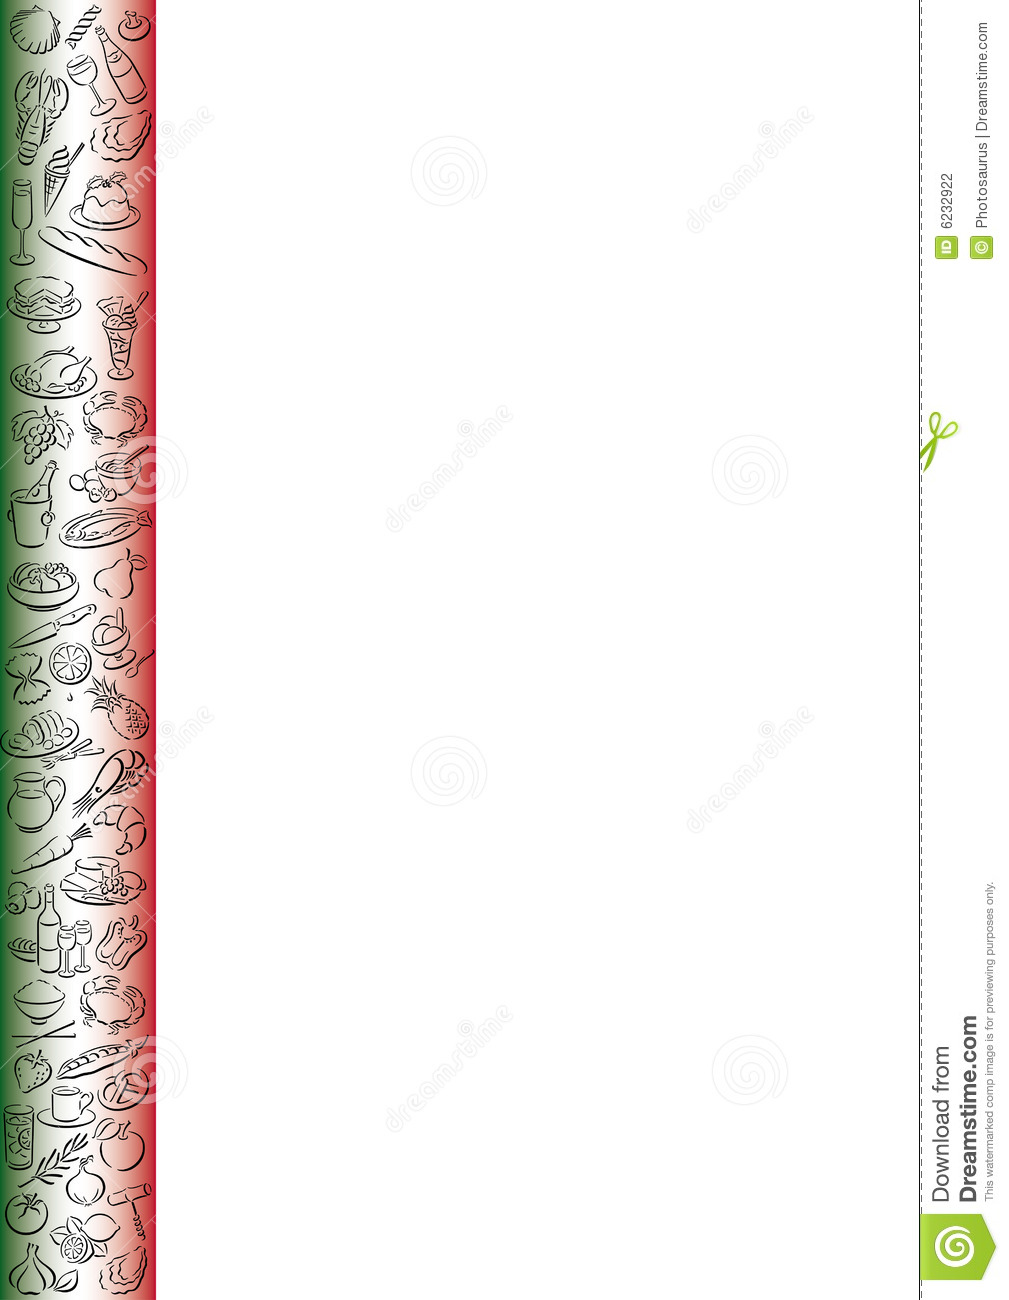 White Background With A Border In The Italian Colors With Food Symbols